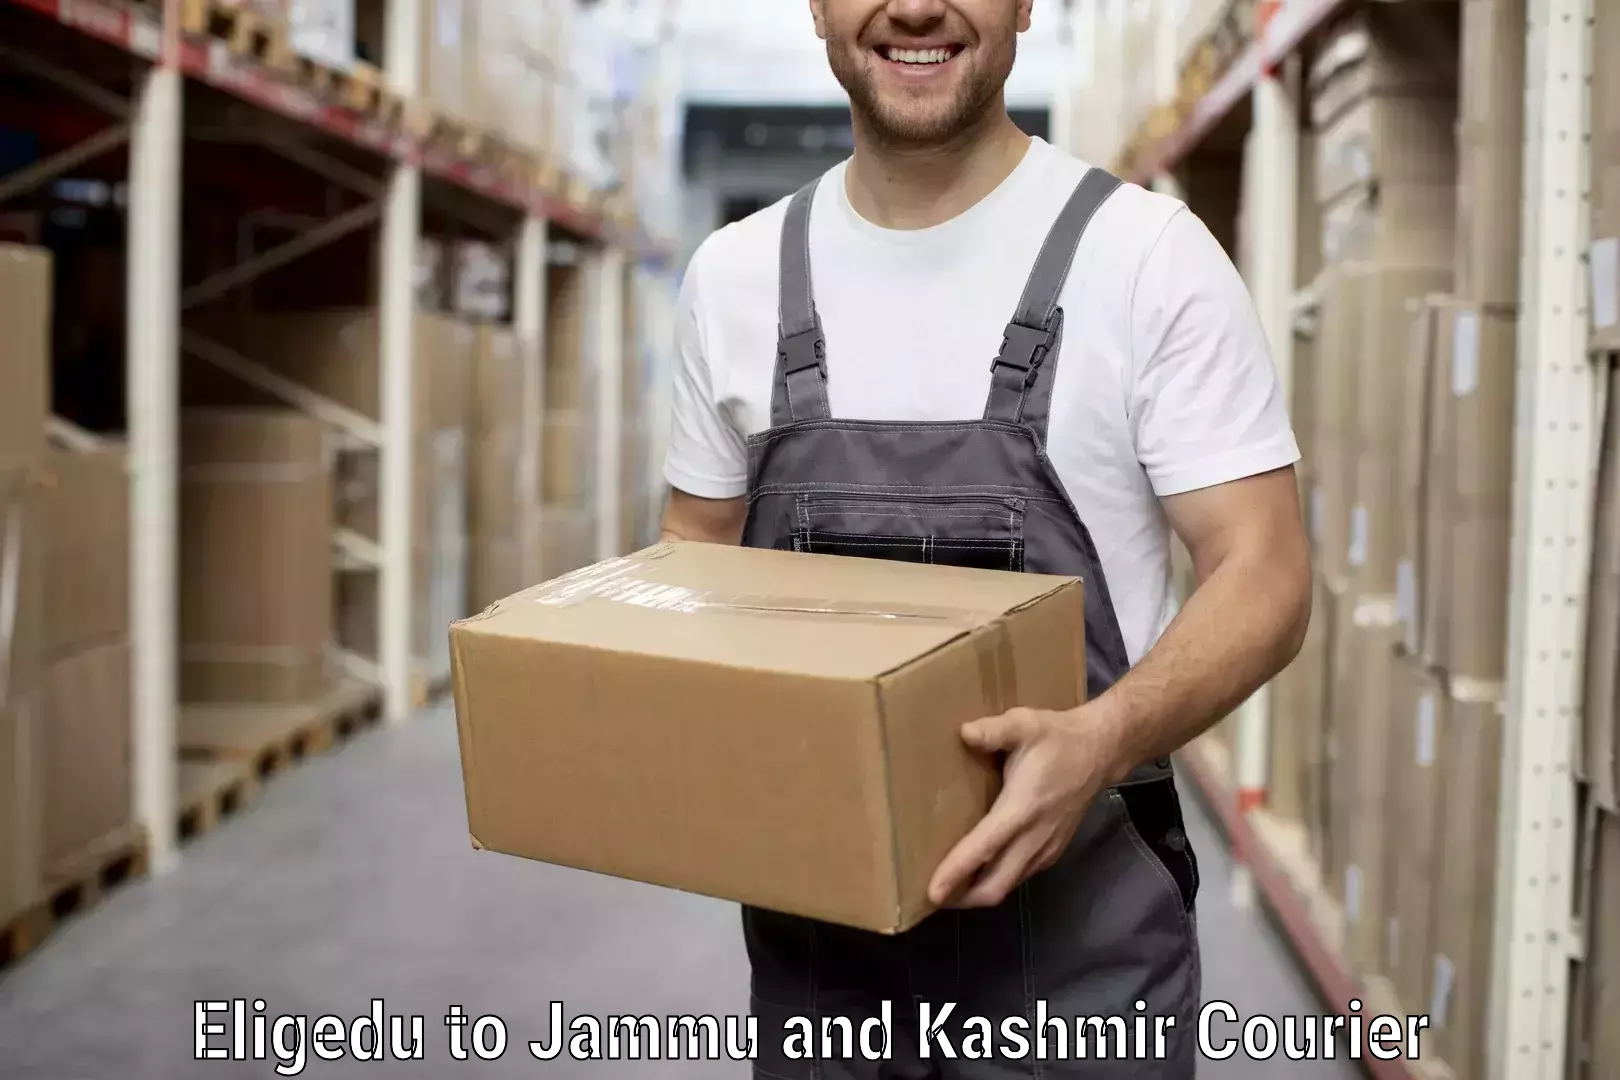 Household goods movers and packers Eligedu to University of Jammu